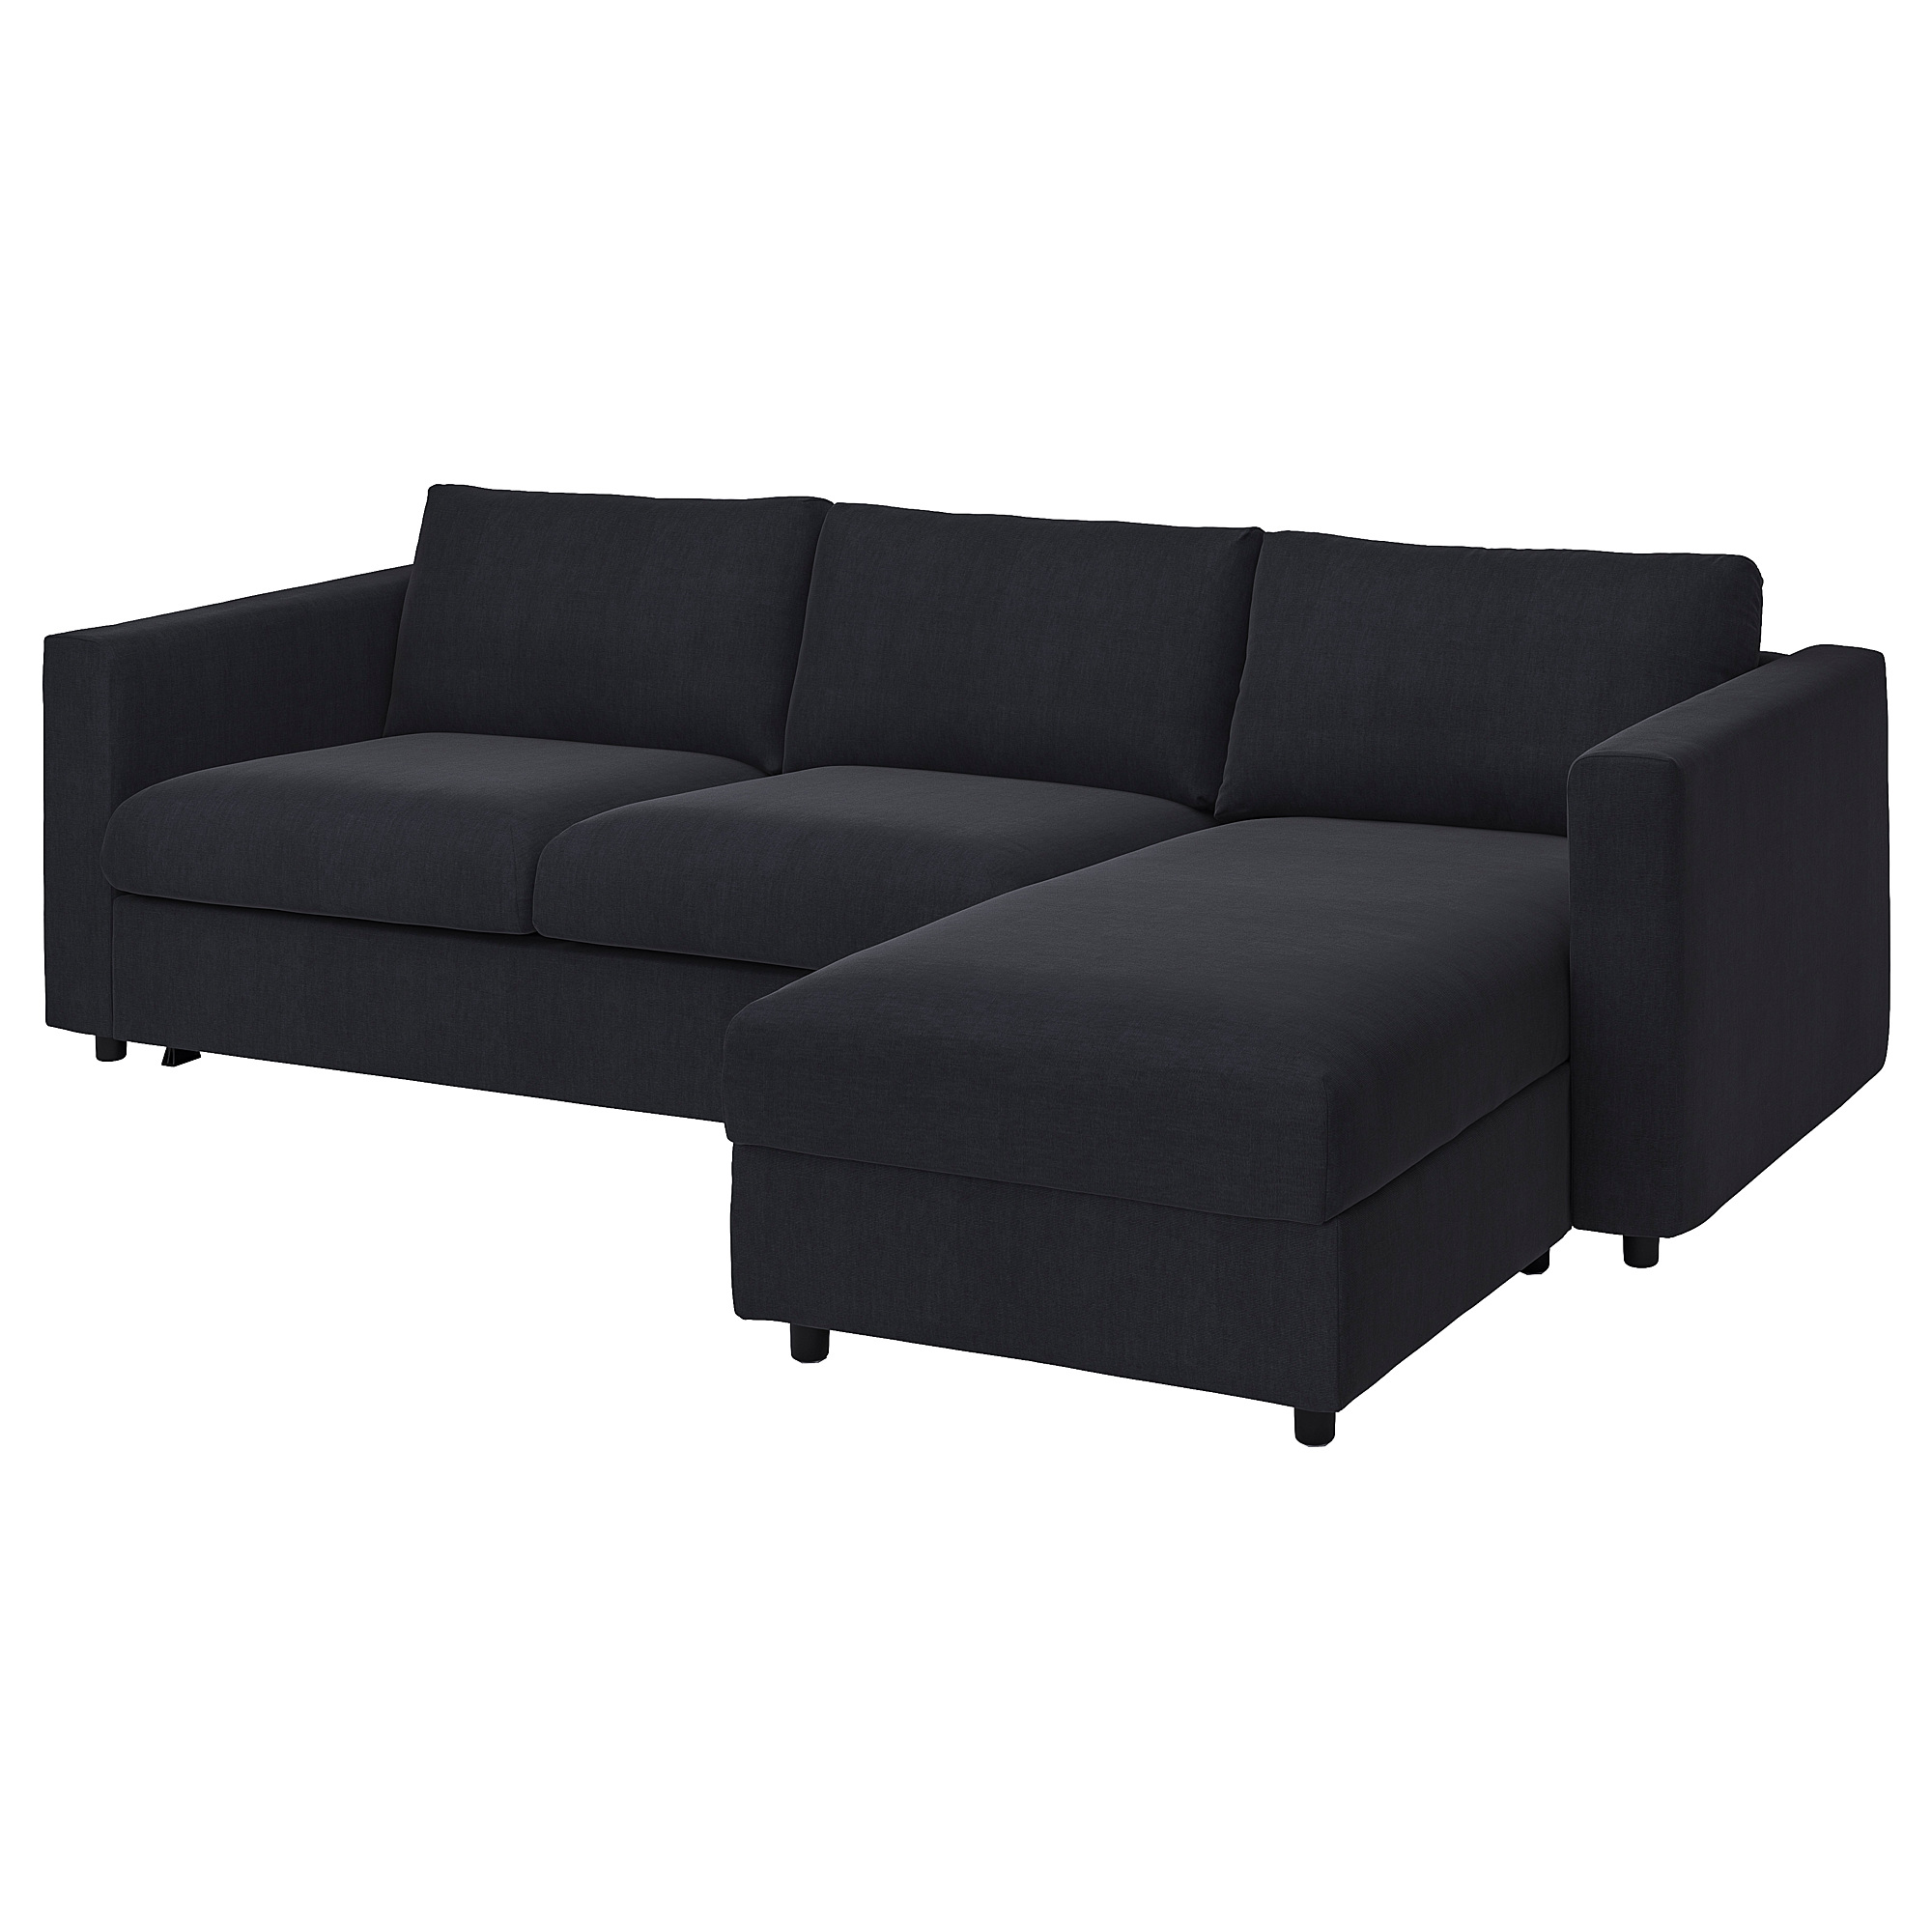 VIMLE cover 3-seat sofa-bed w chaise lng